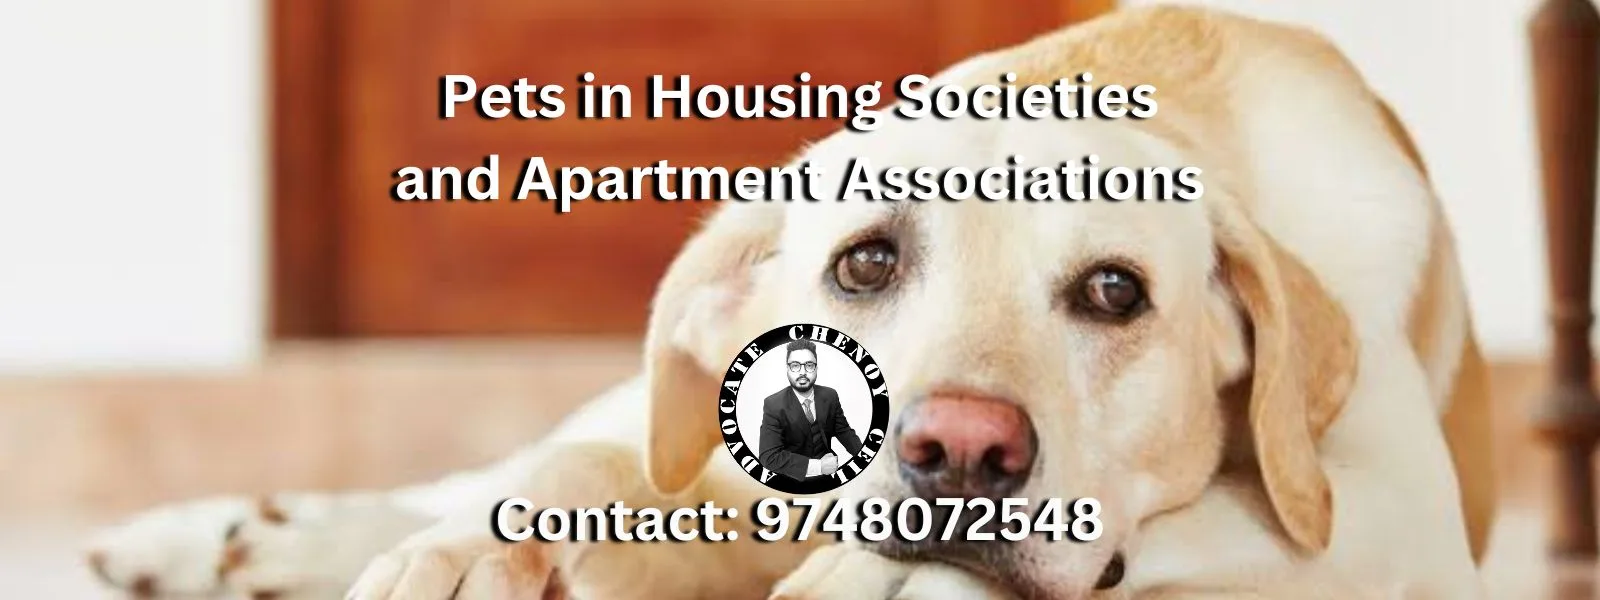 Pets in Housing Societies or Apartments